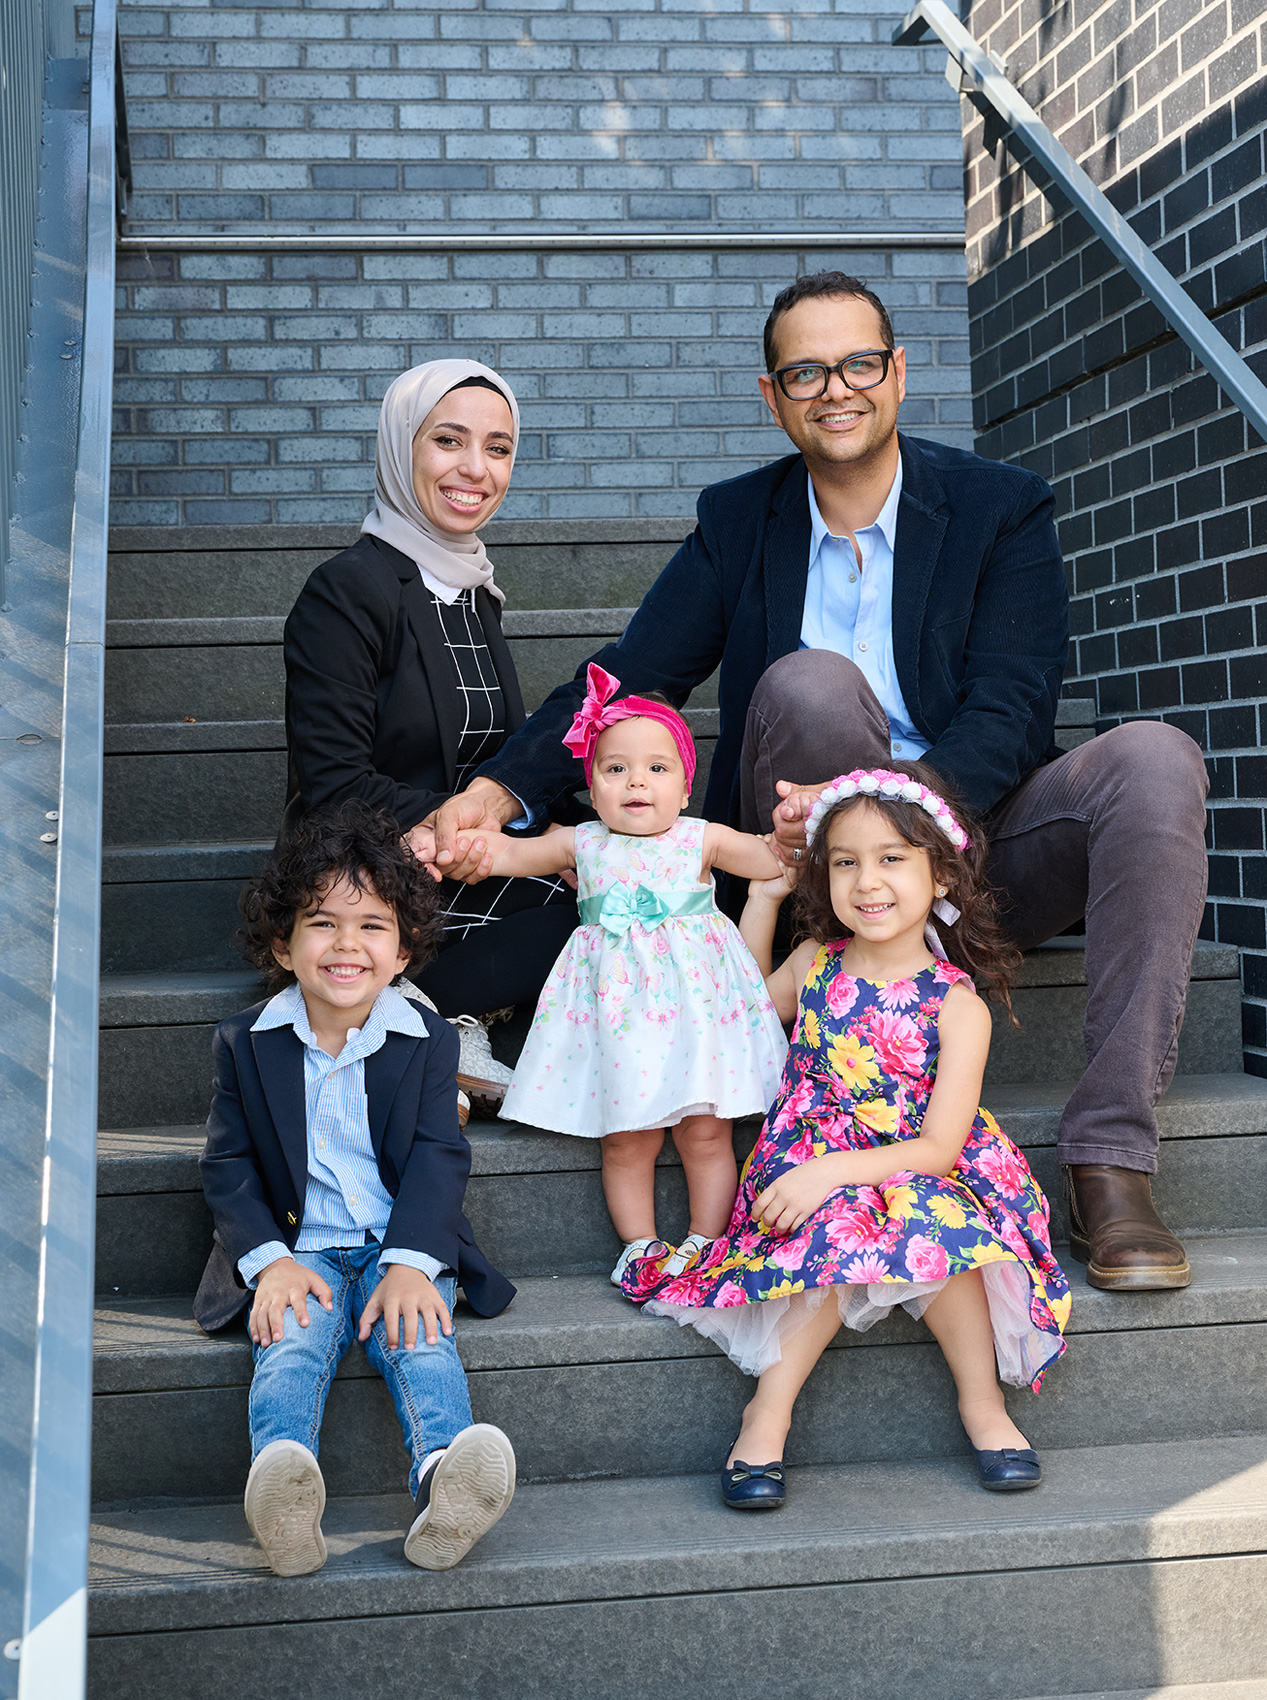 Erich-Saide-Vancouver-Photographer-Family-Portrait-Editorial-Lifestyle-Charity-McDonalds-RMHC-RMHCanada-Family-sitting-on-stairs